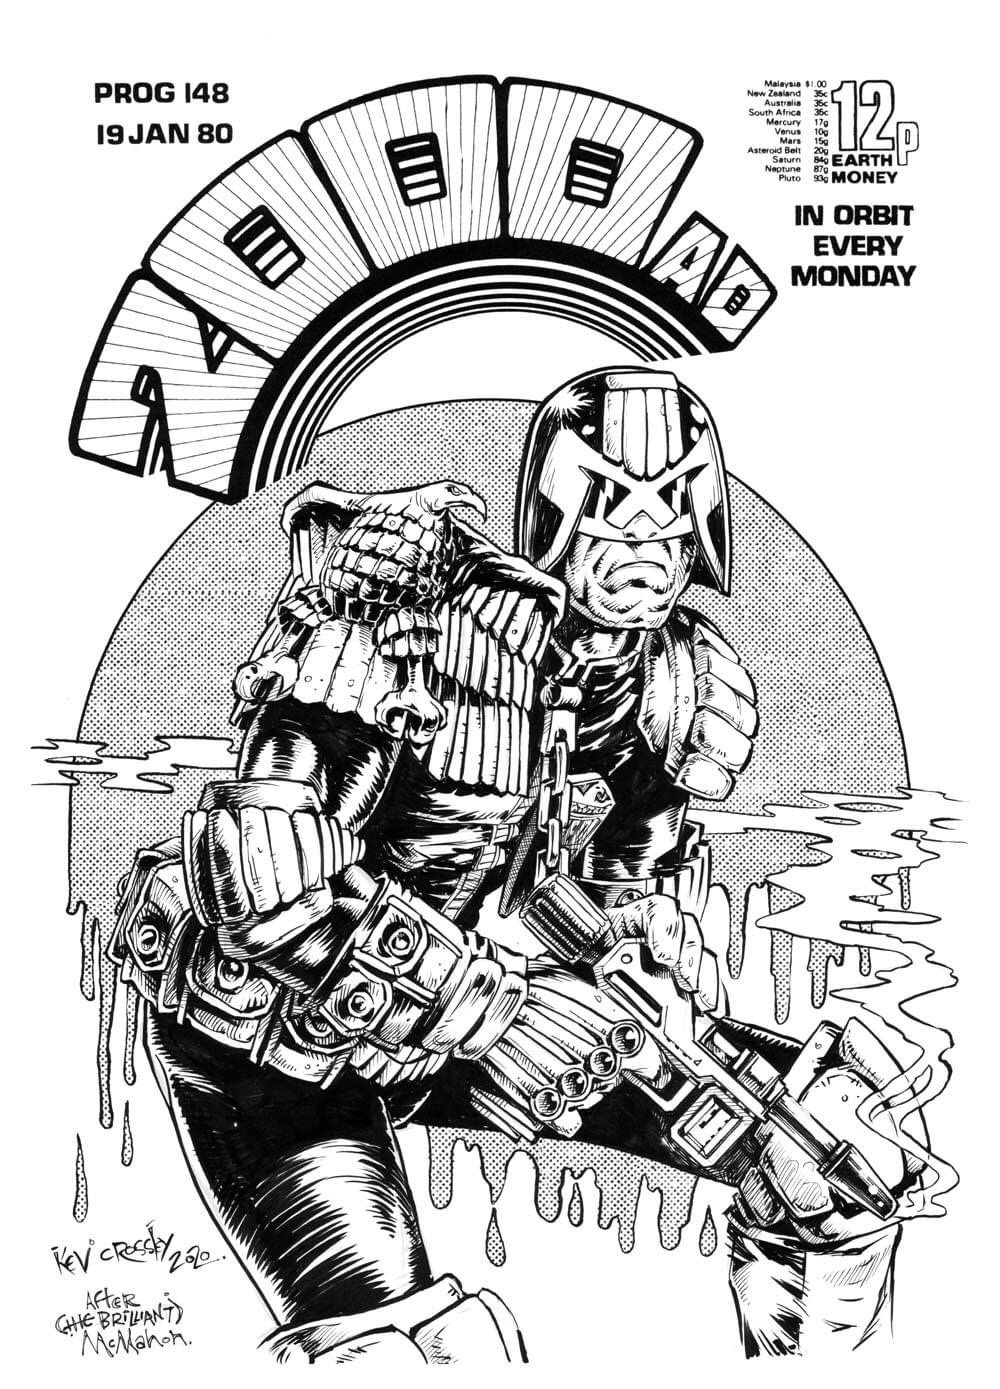 Kev Crossley’s homage to 2000AD Prog 148 by Mick McMahon. “I literally spent two weeks agonising over whether I should do this one at all,” he says